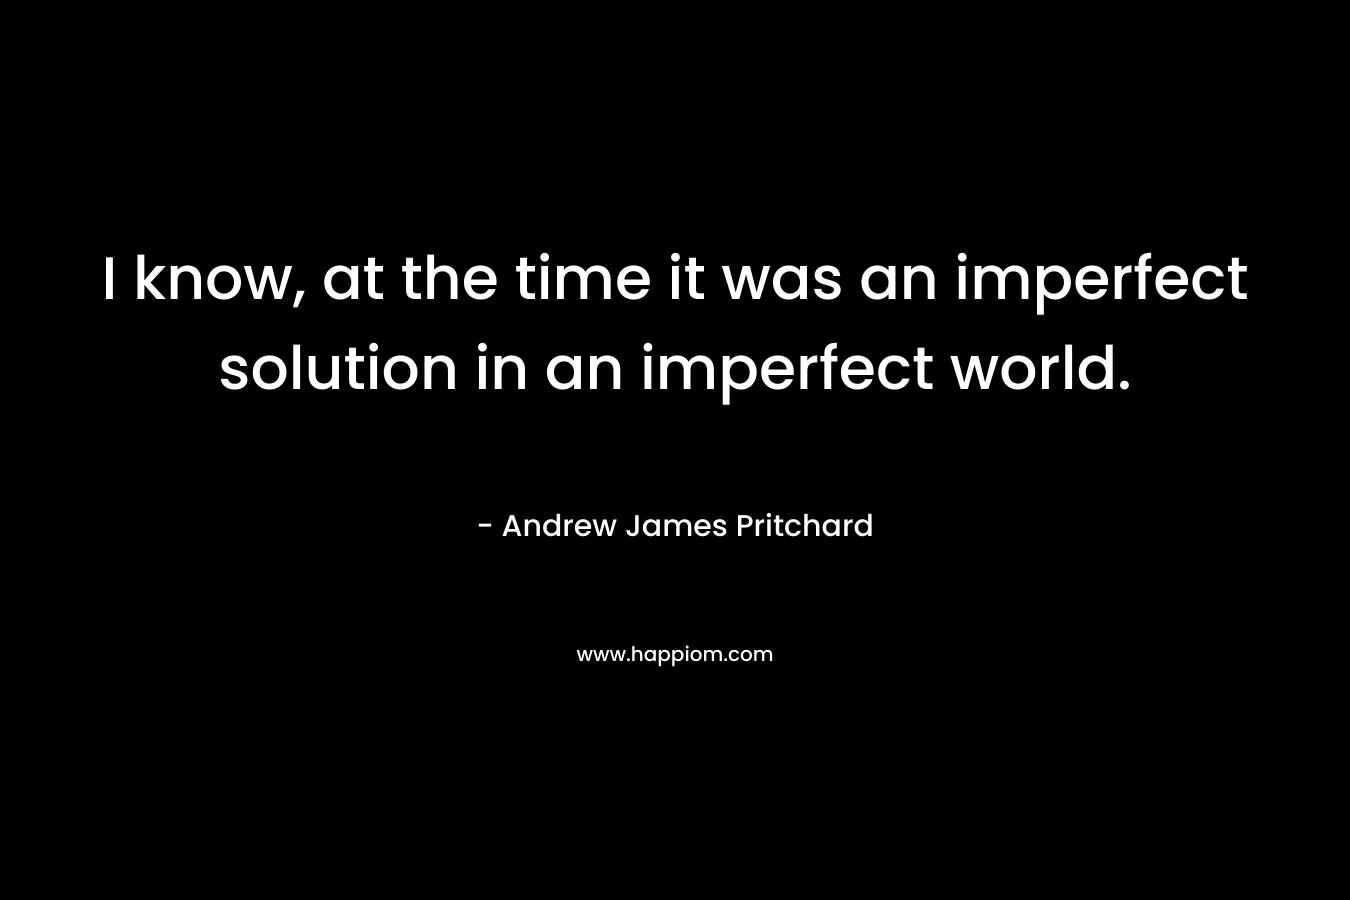 I know, at the time it was an imperfect solution in an imperfect world.